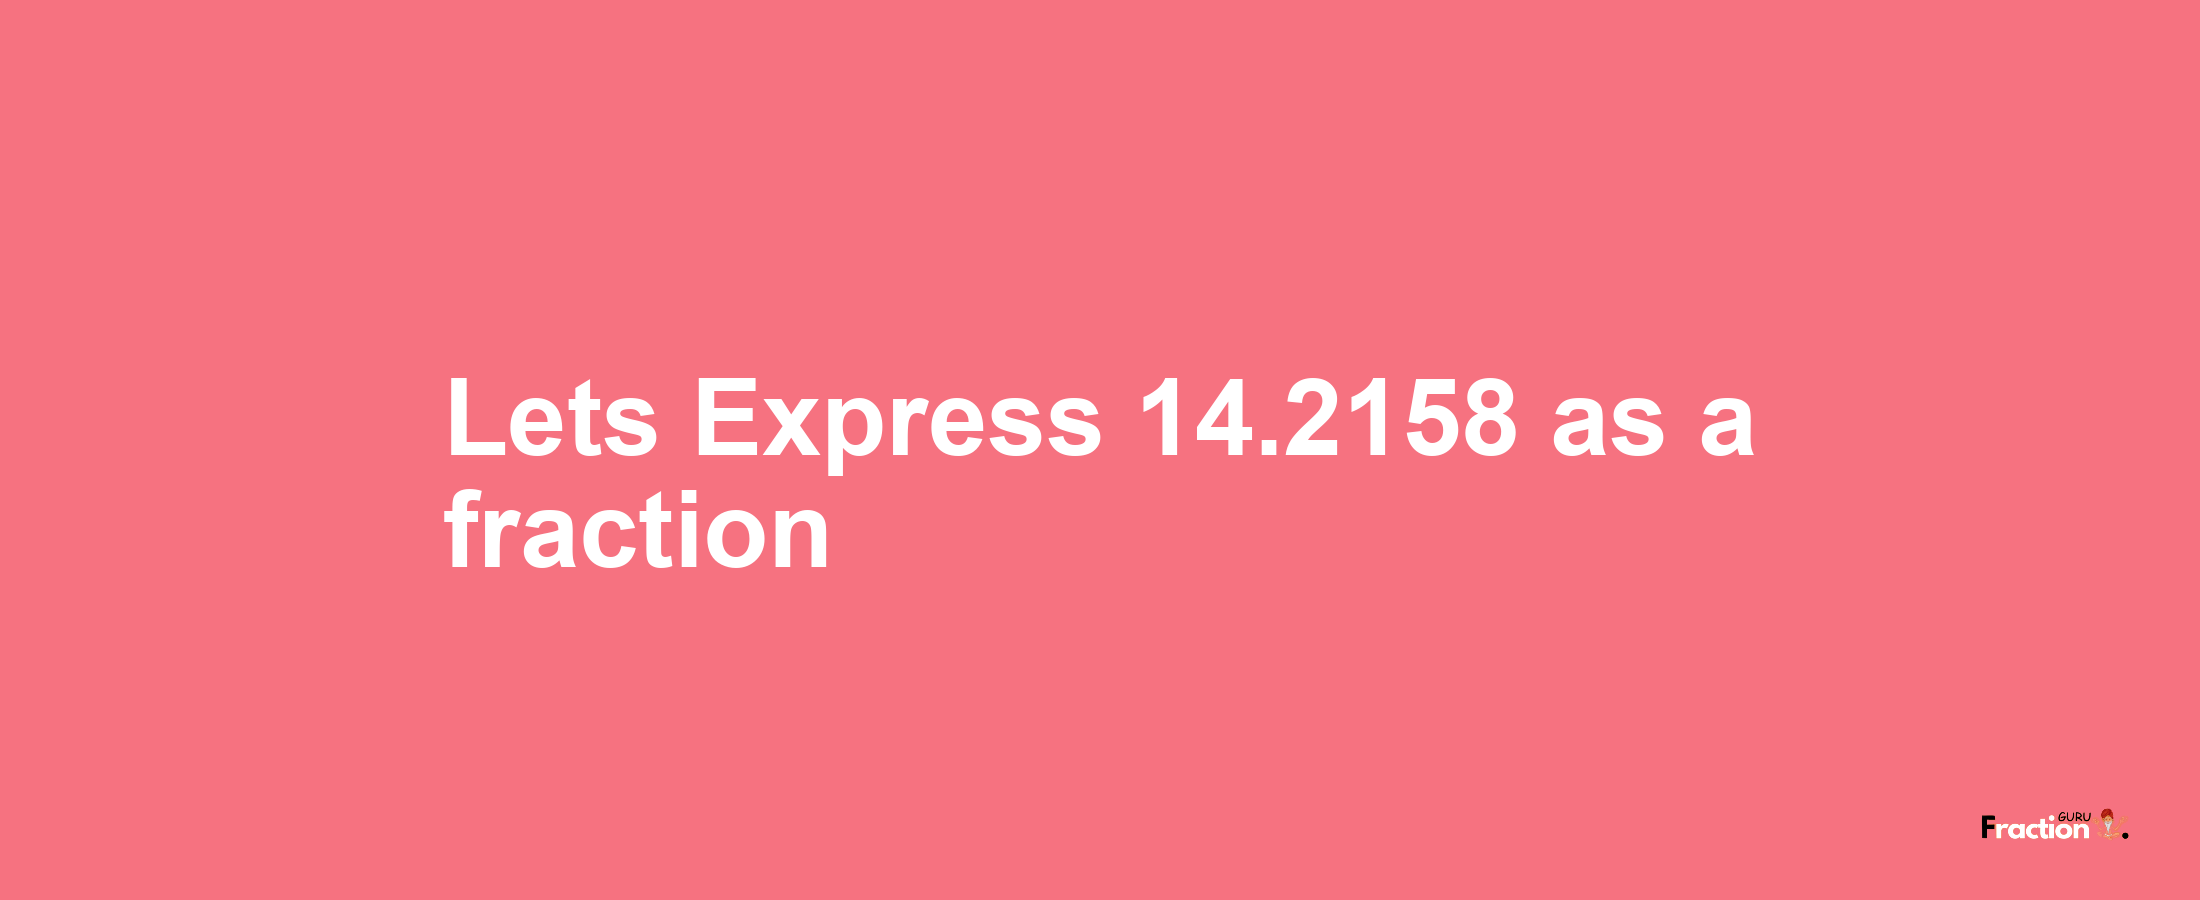 Lets Express 14.2158 as afraction